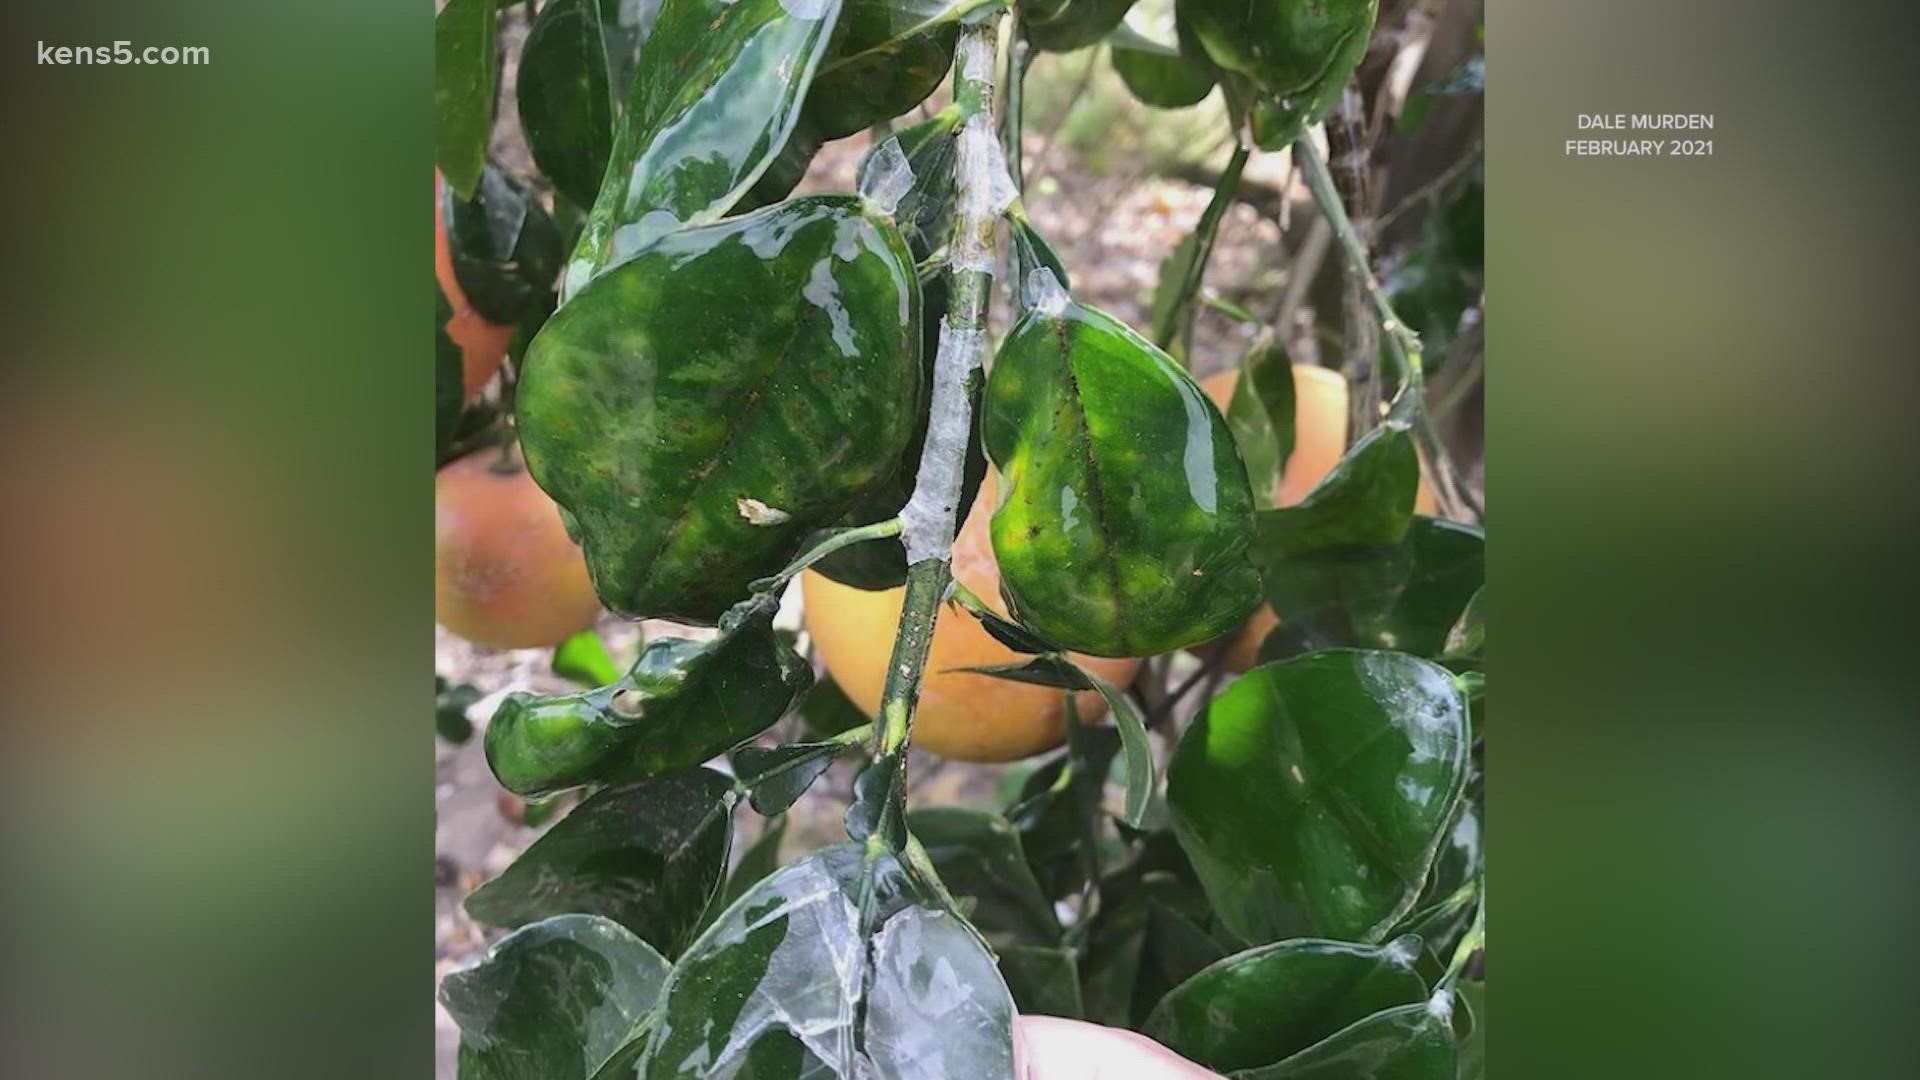 The new arctic blast could threaten the Rio Grande Valley's citrus-growers and next season’s crops.